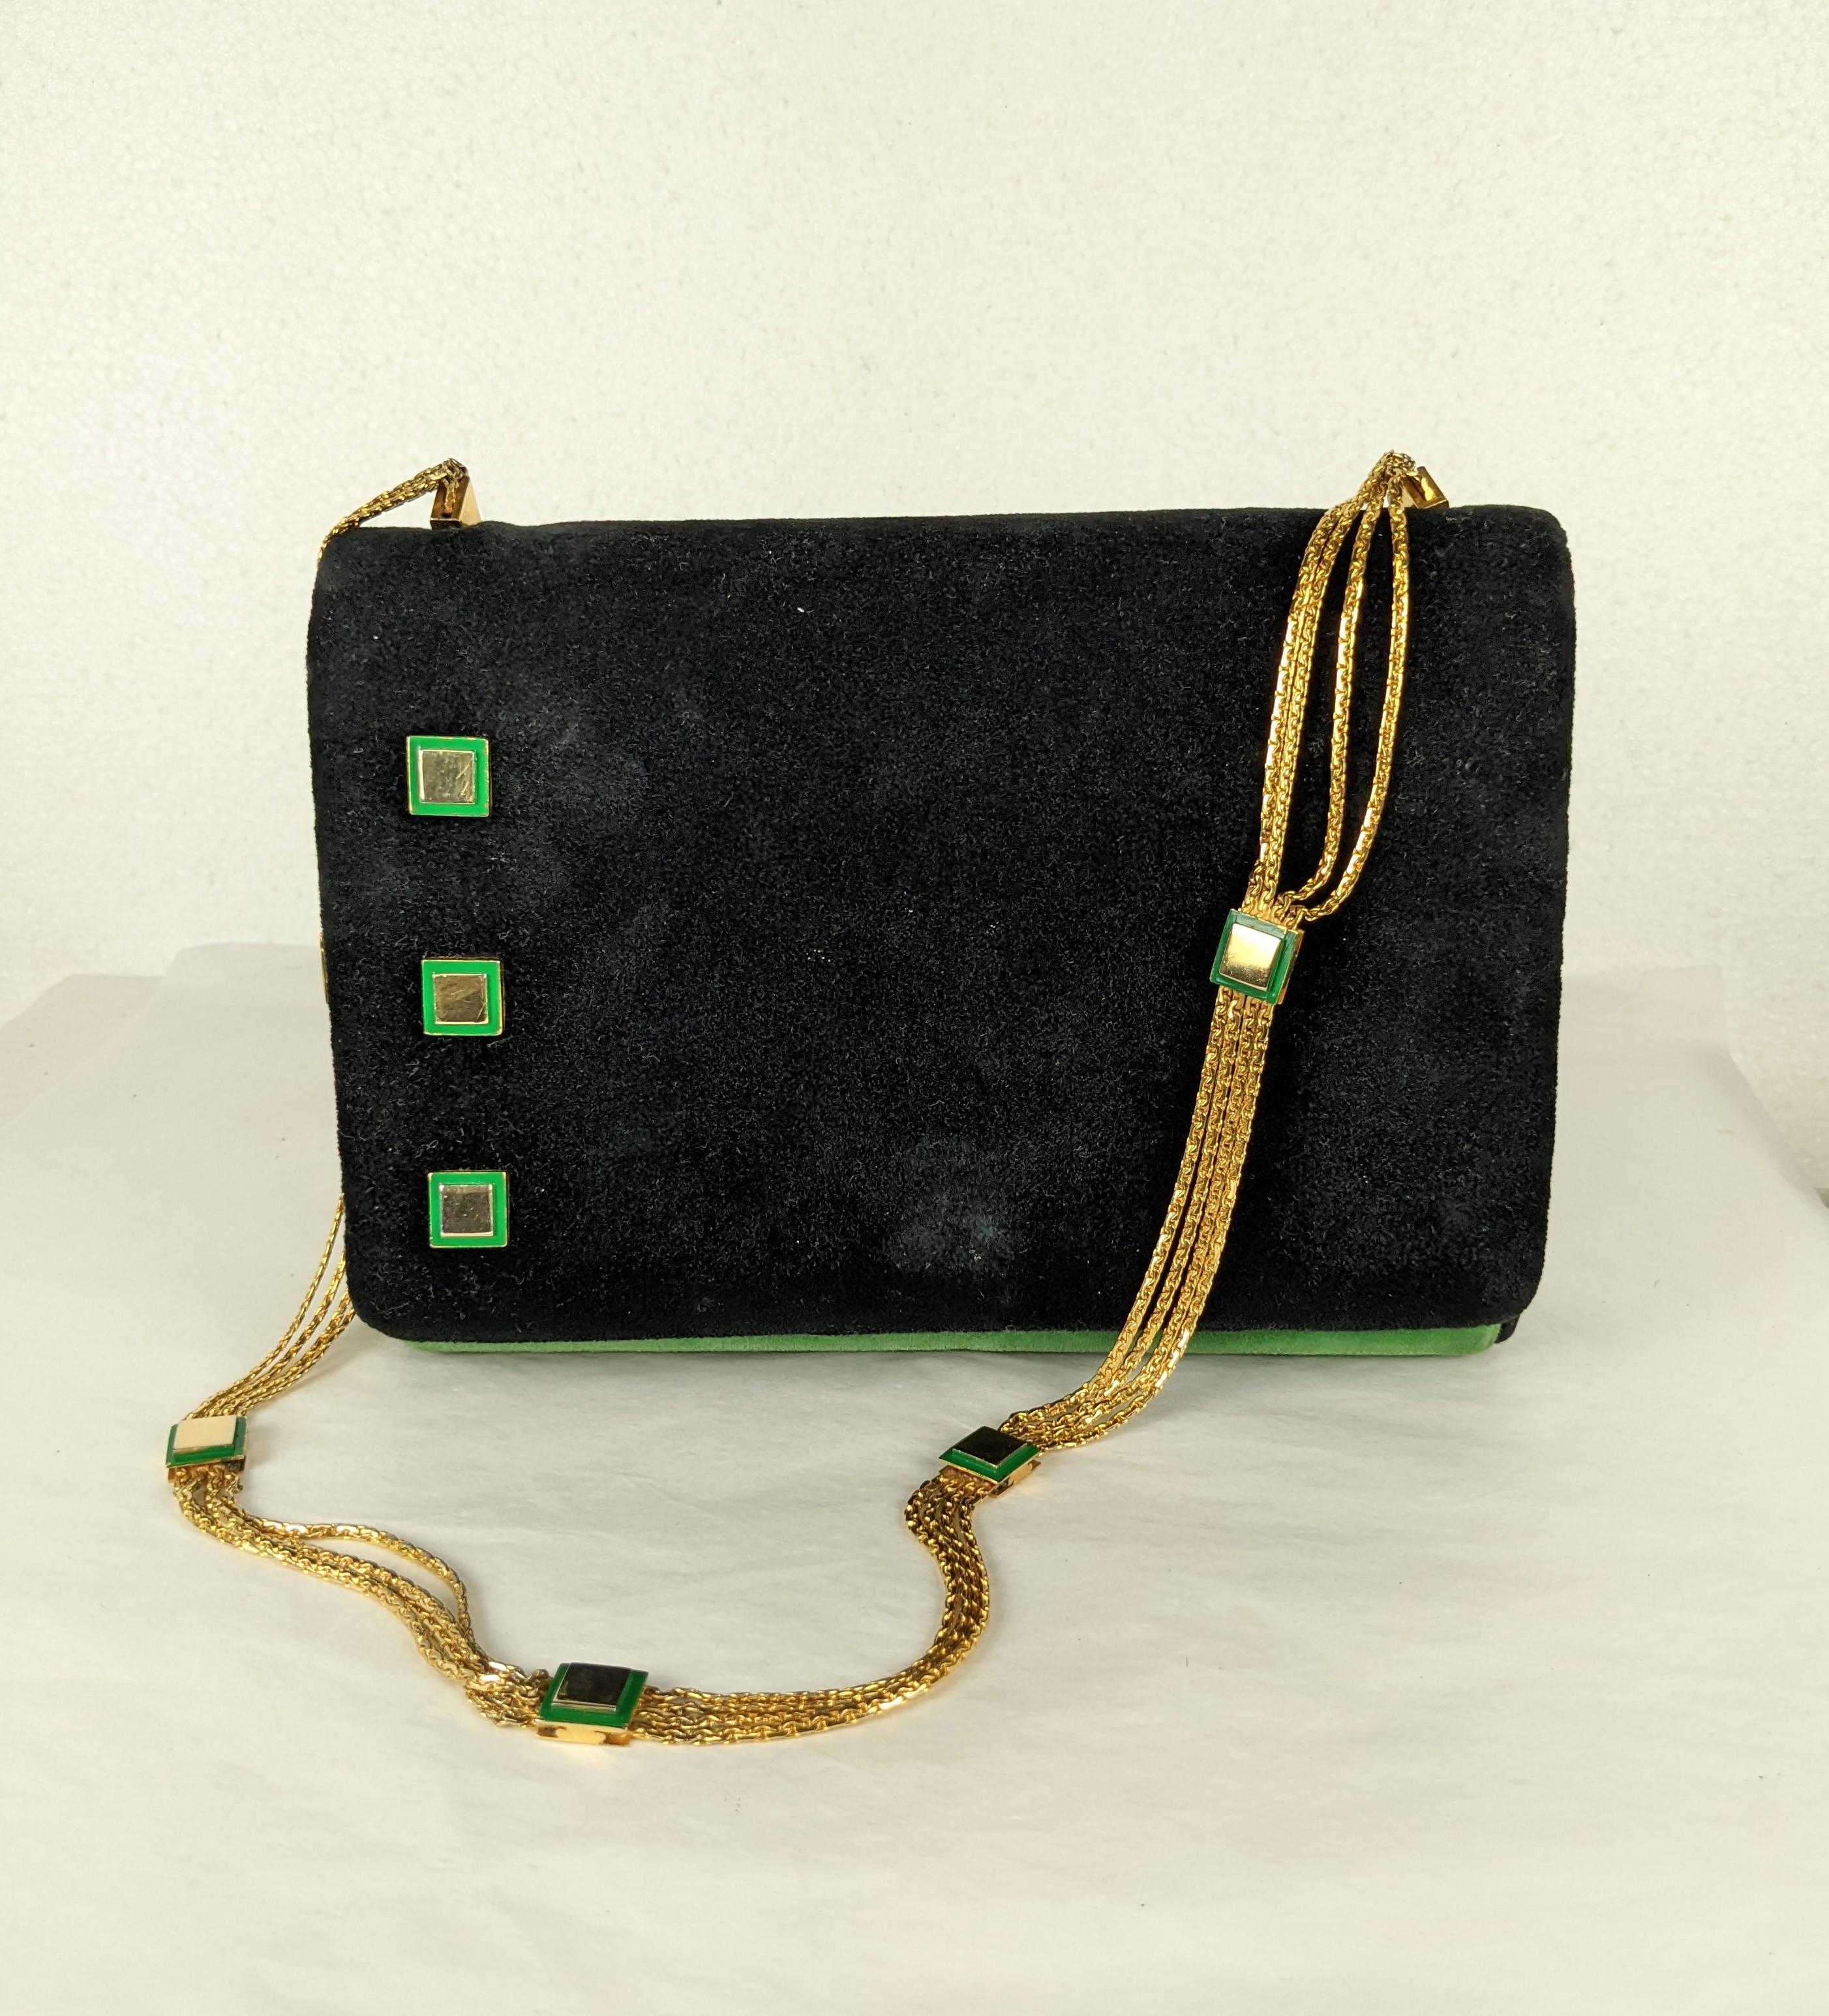 Charming Italian Velvet Purse with Enamel Accents from the 1960's. Black and Nile Green velvet 2 toned purse with 4 chain link strap with enamel stations. These stations also decorate the flap of the purse as well. Black faille lining. Mangiameli